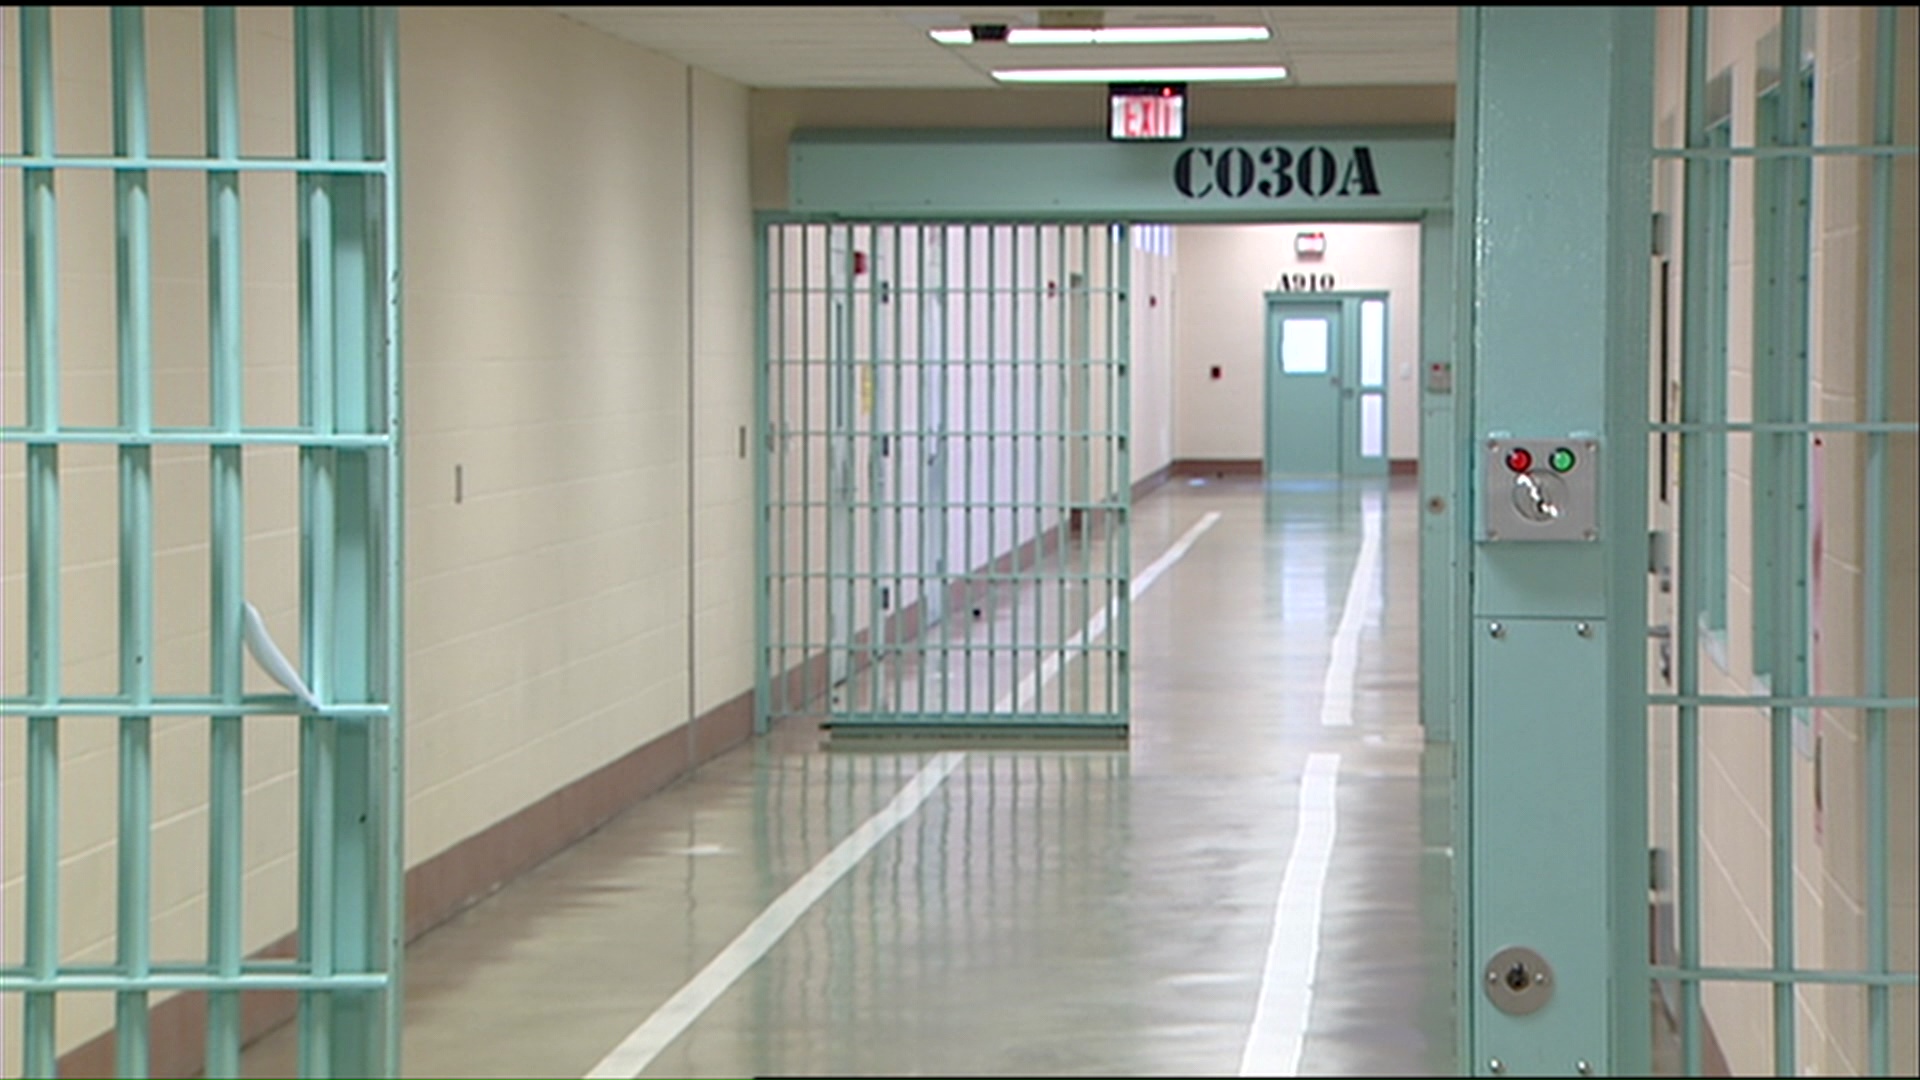 An inmate from St. Joseph County Jail was recently pronounced dead inside the said prison. (Photo: WNDU)